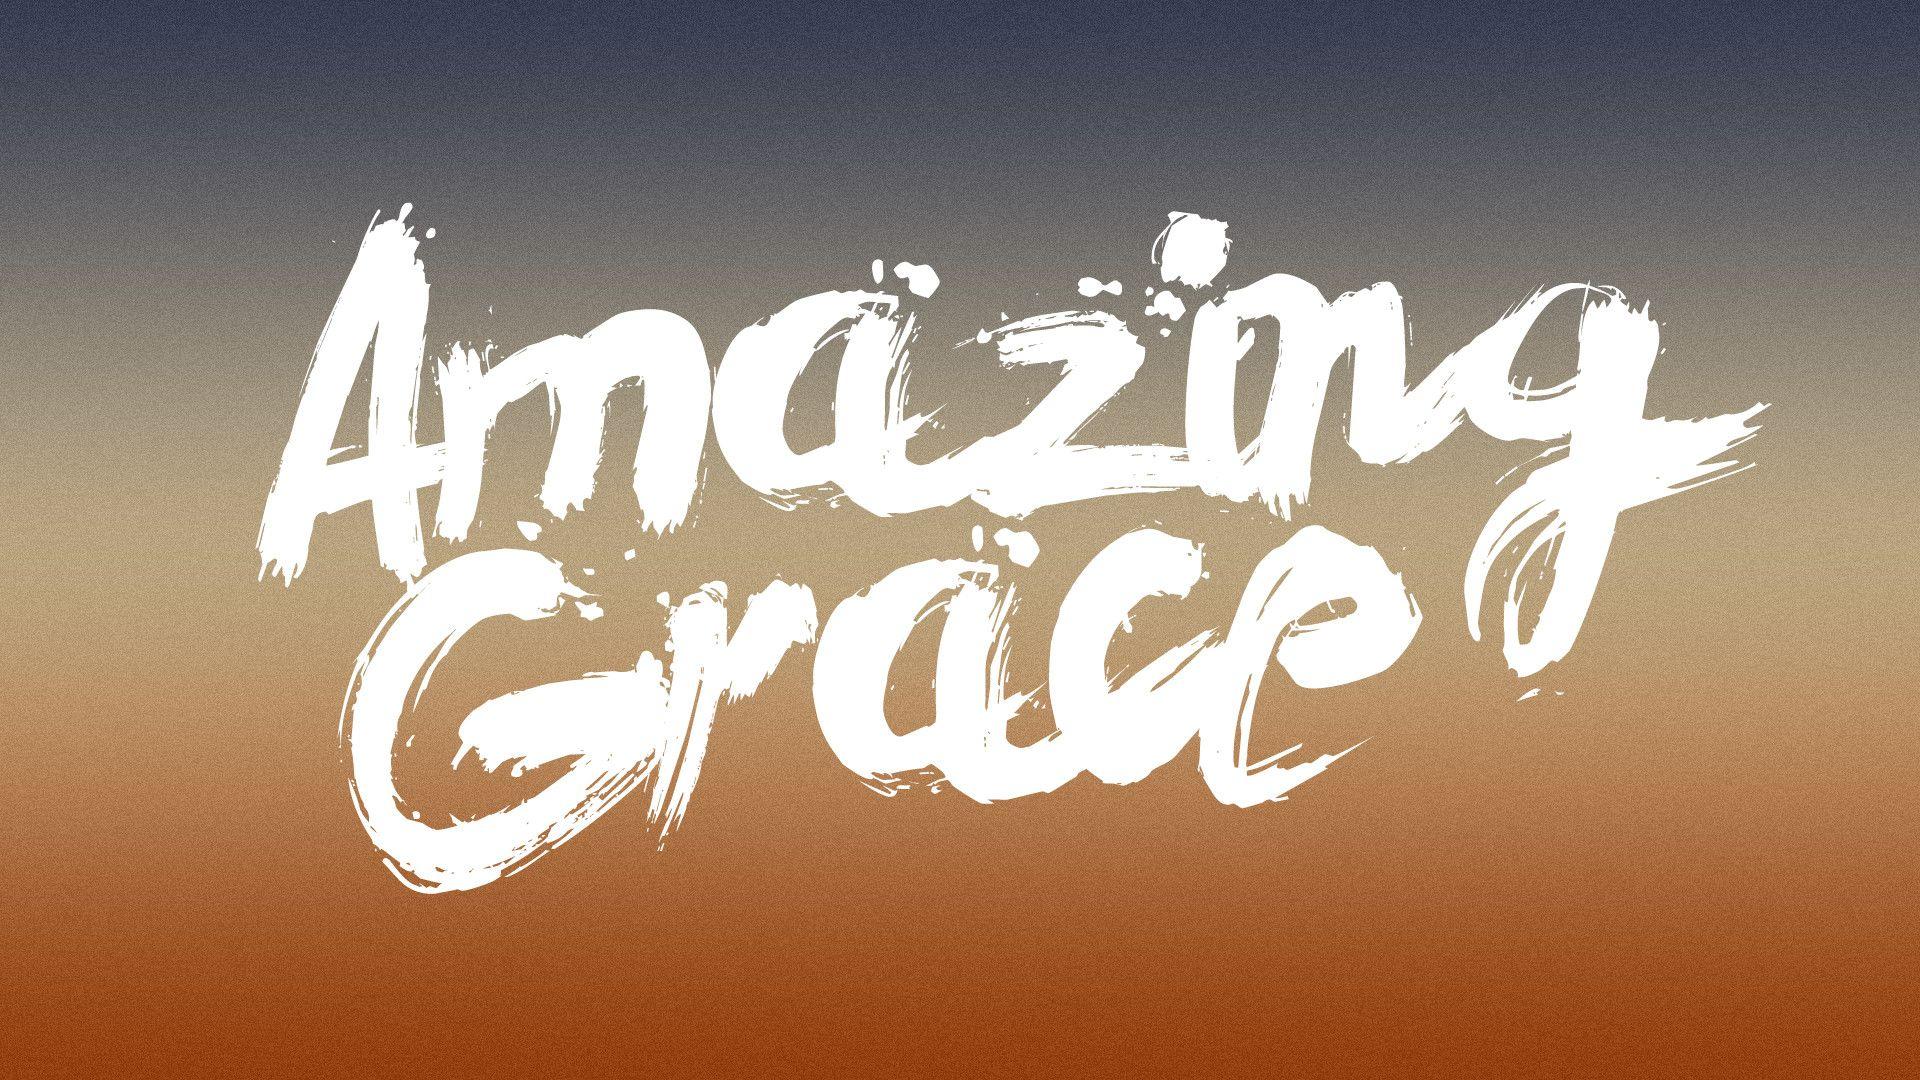 Yes, Your Grace for apple download free